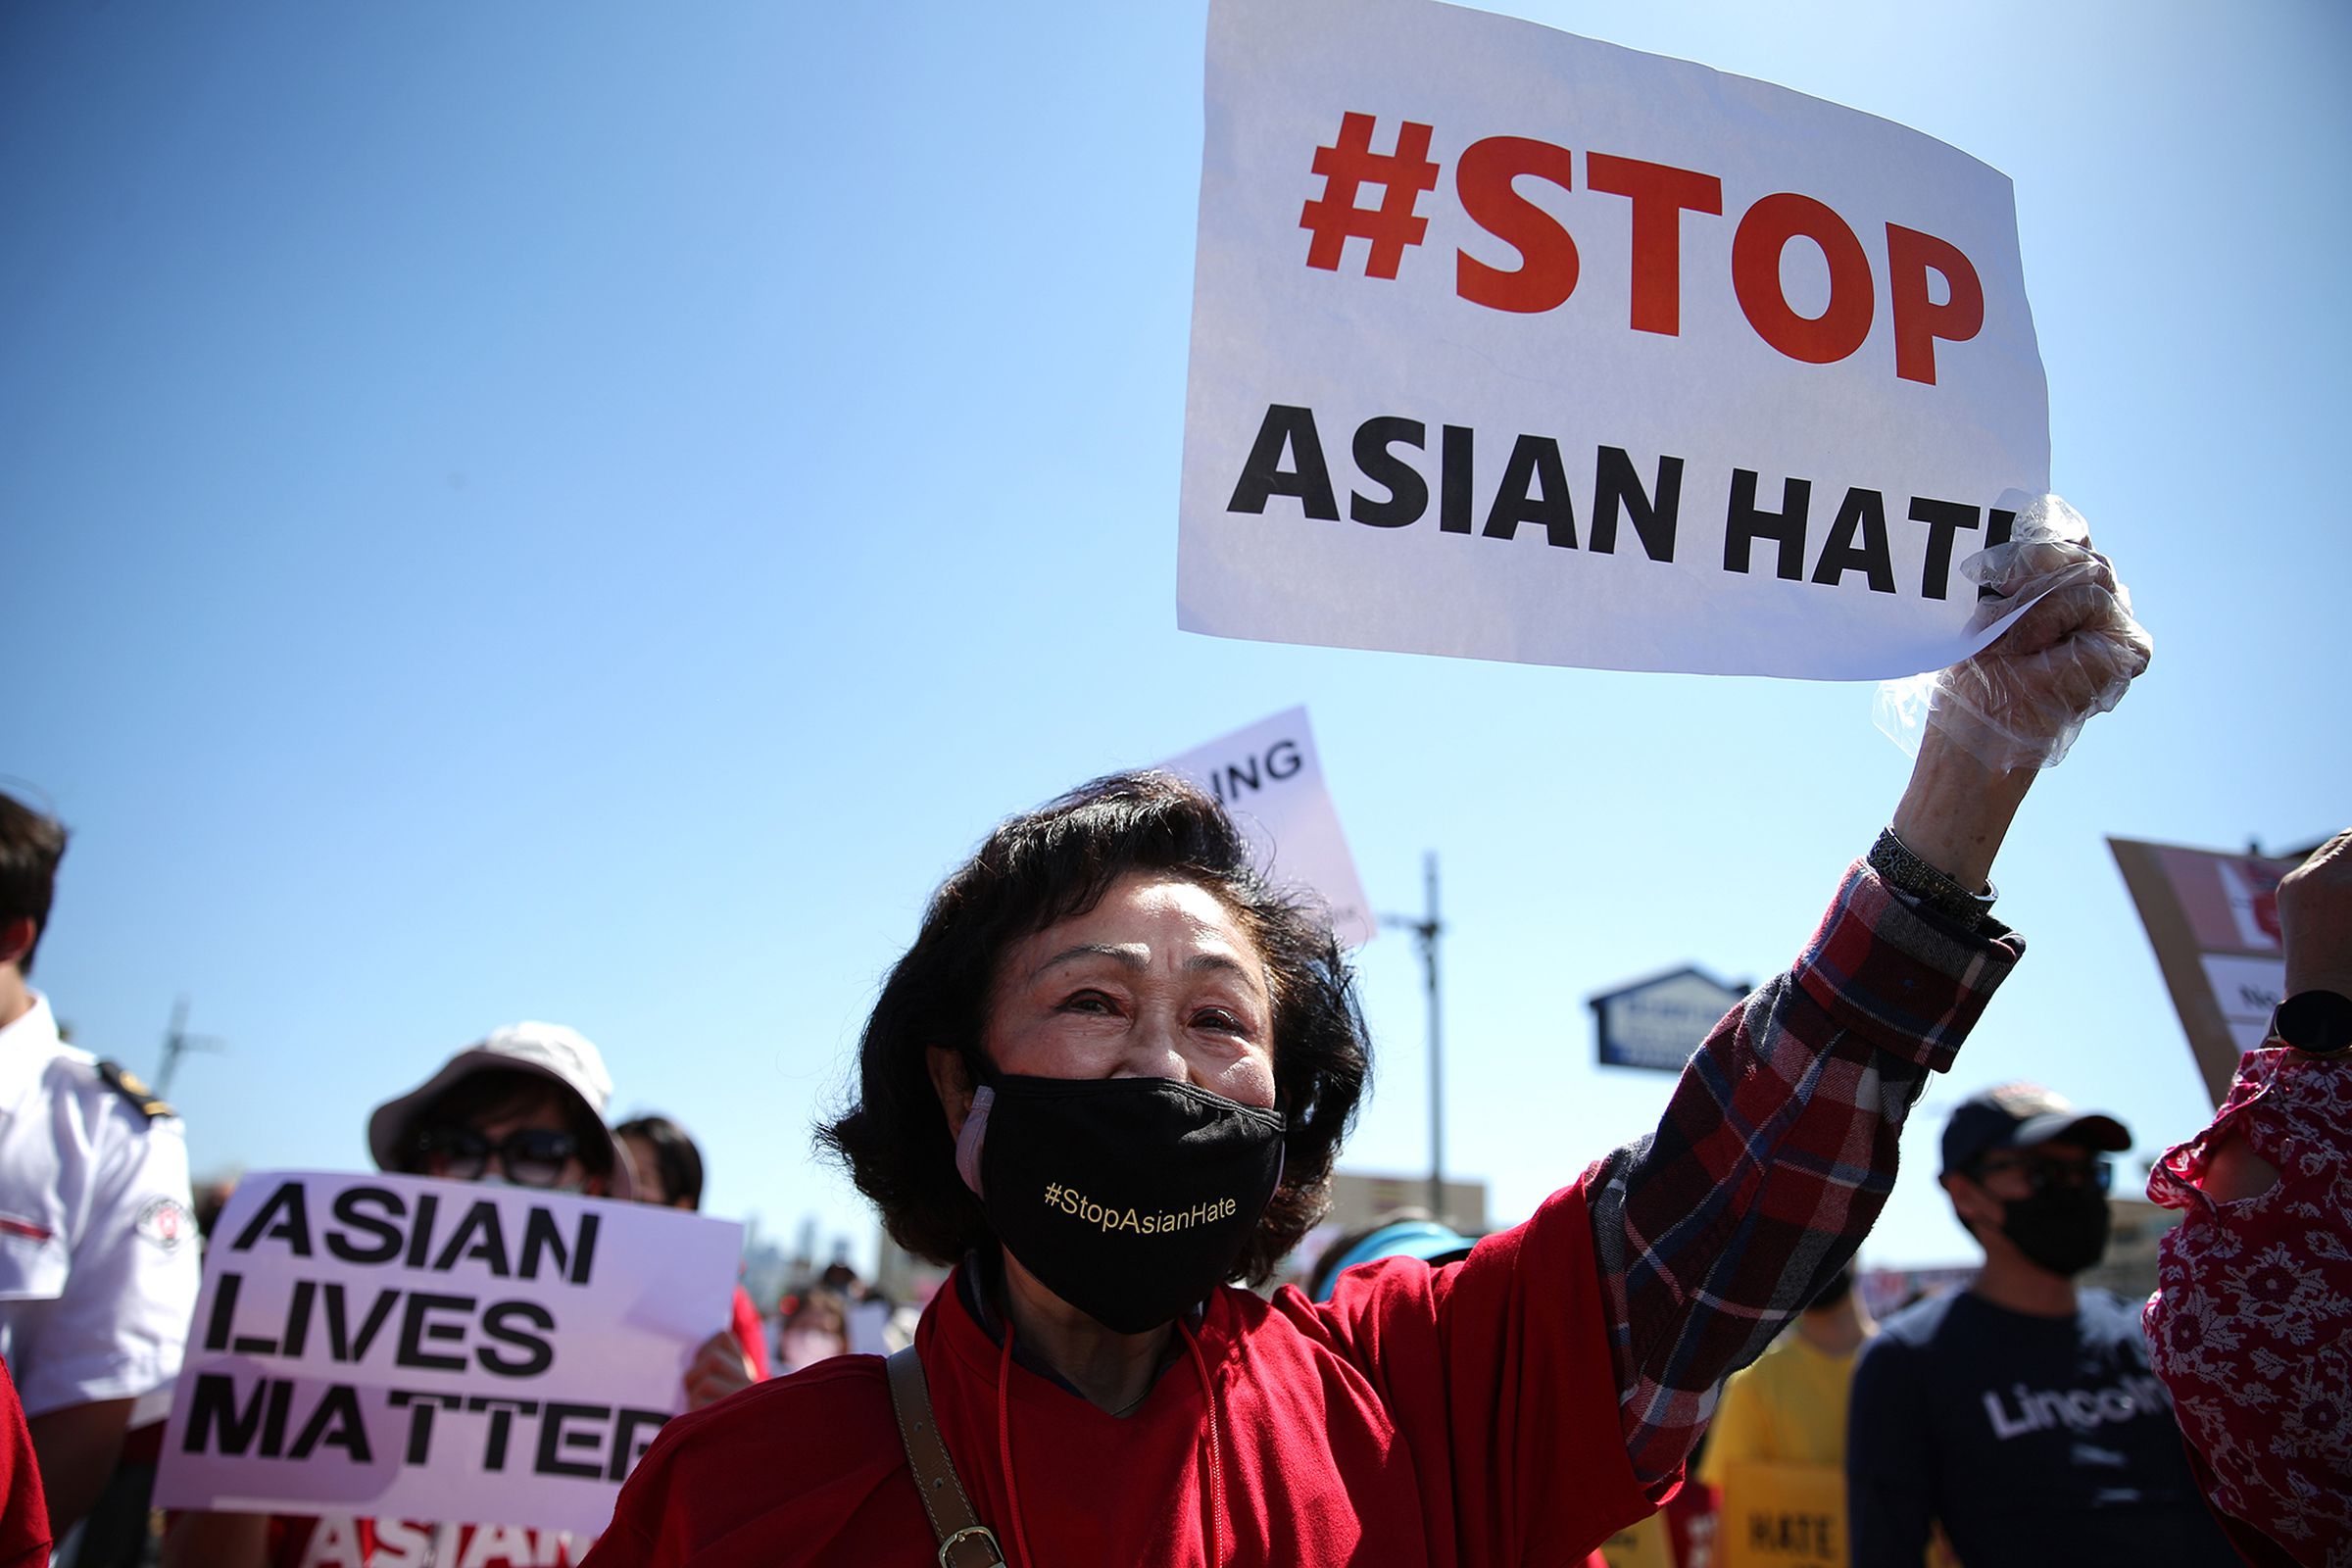 People demonstrate at the ‘Stop Asian Hate March and Rally’ in Koreatown on March 27, 2021 in Los Angeles, California. March 27 is the #StopAsianHate National Day of Action against anti-Asian violence. On March 16th, eight people were killed at three Atlanta-area spas, six of whom were Asian women, in an attack that sent fear through the Asian community amid a rise in anti-Asian hate crimes.